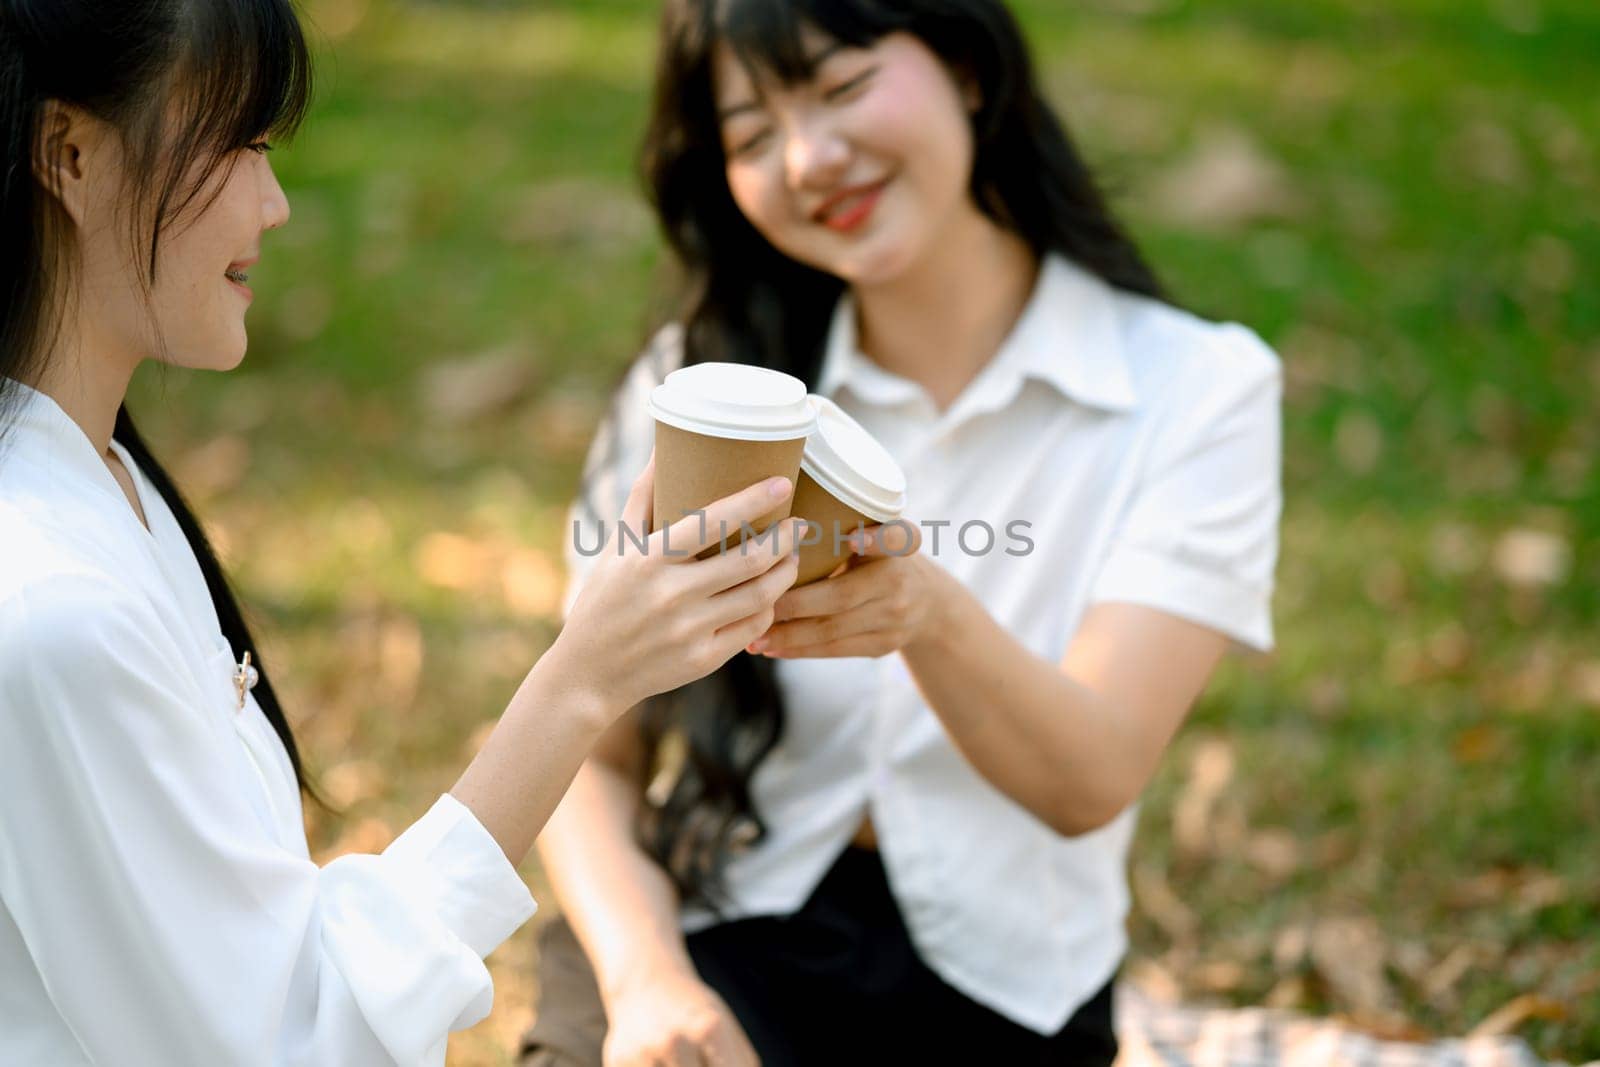 Smiling young woman clinking paper cups of coffee with her friend while relaxing together in the park by prathanchorruangsak